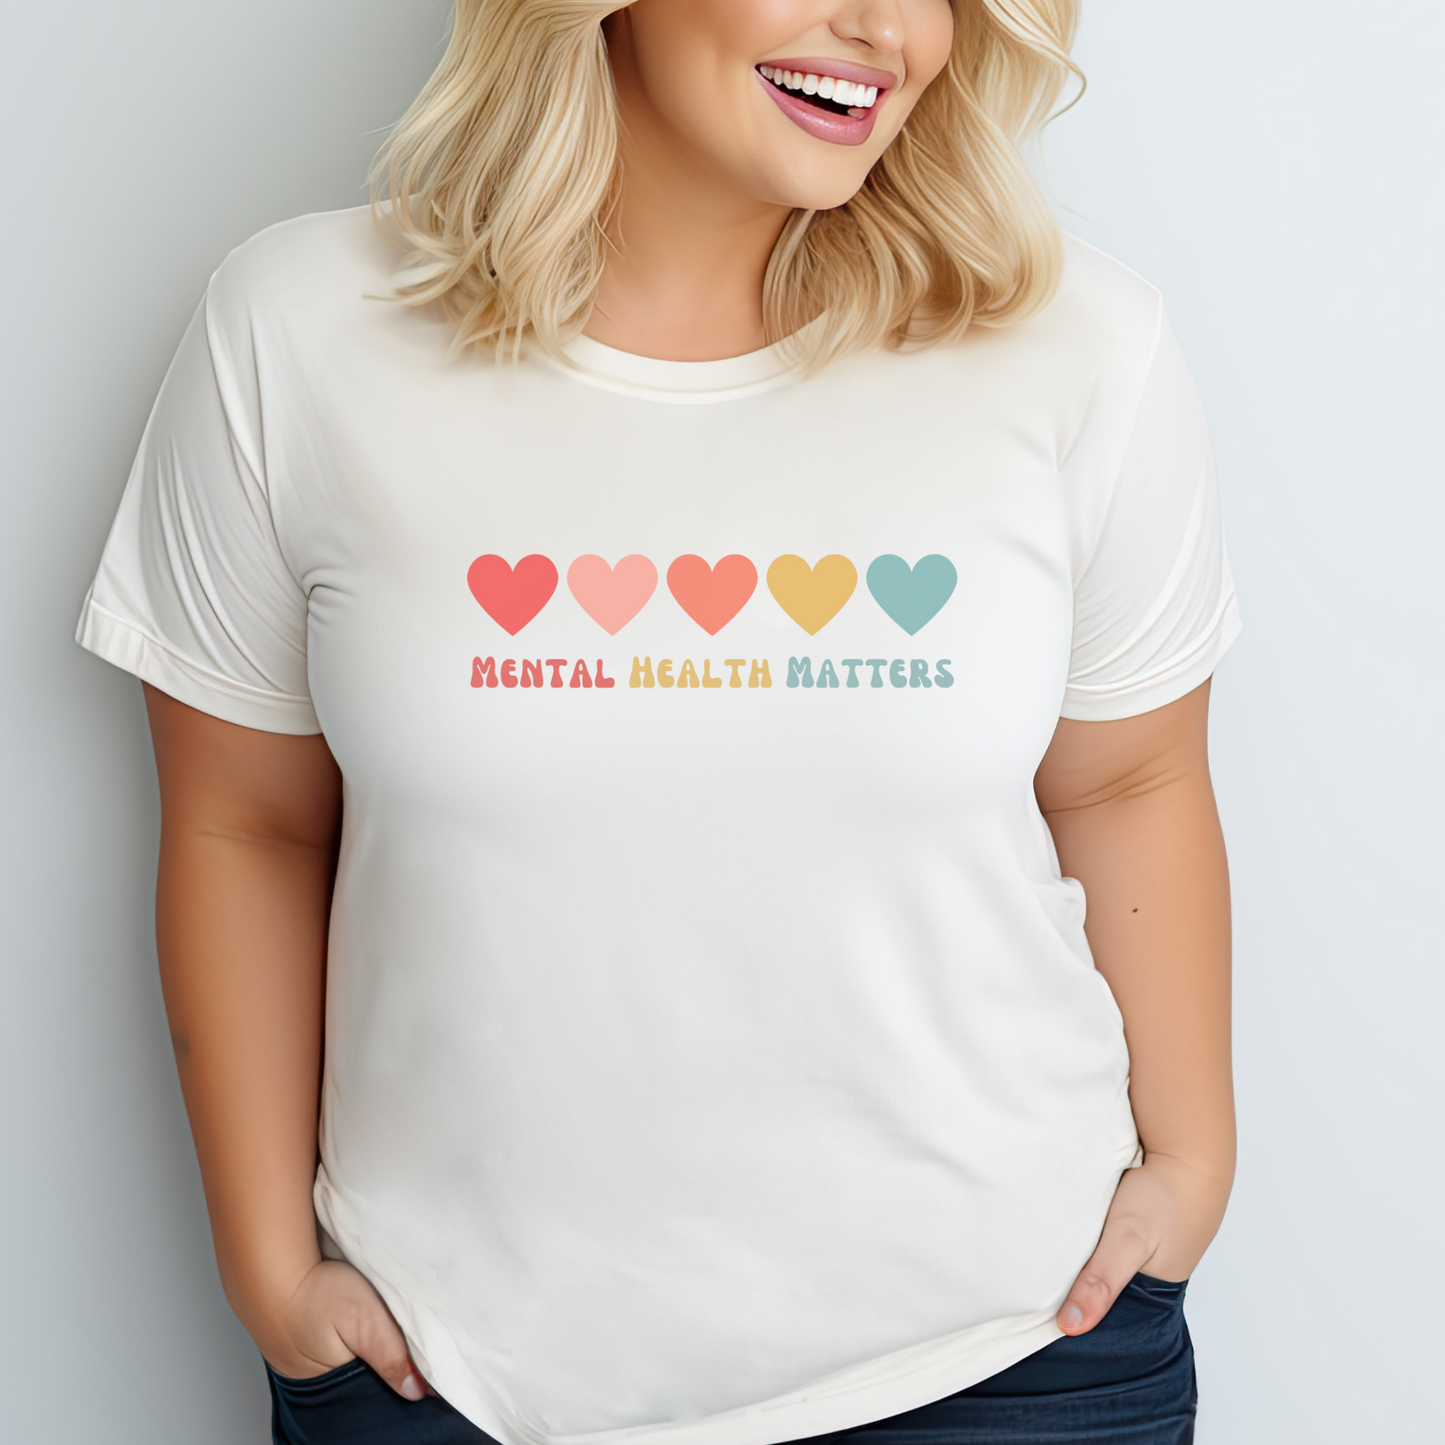 Retro Hearts Unisex T-shirt for Mental Health Acceptance - Embrace Your Diff